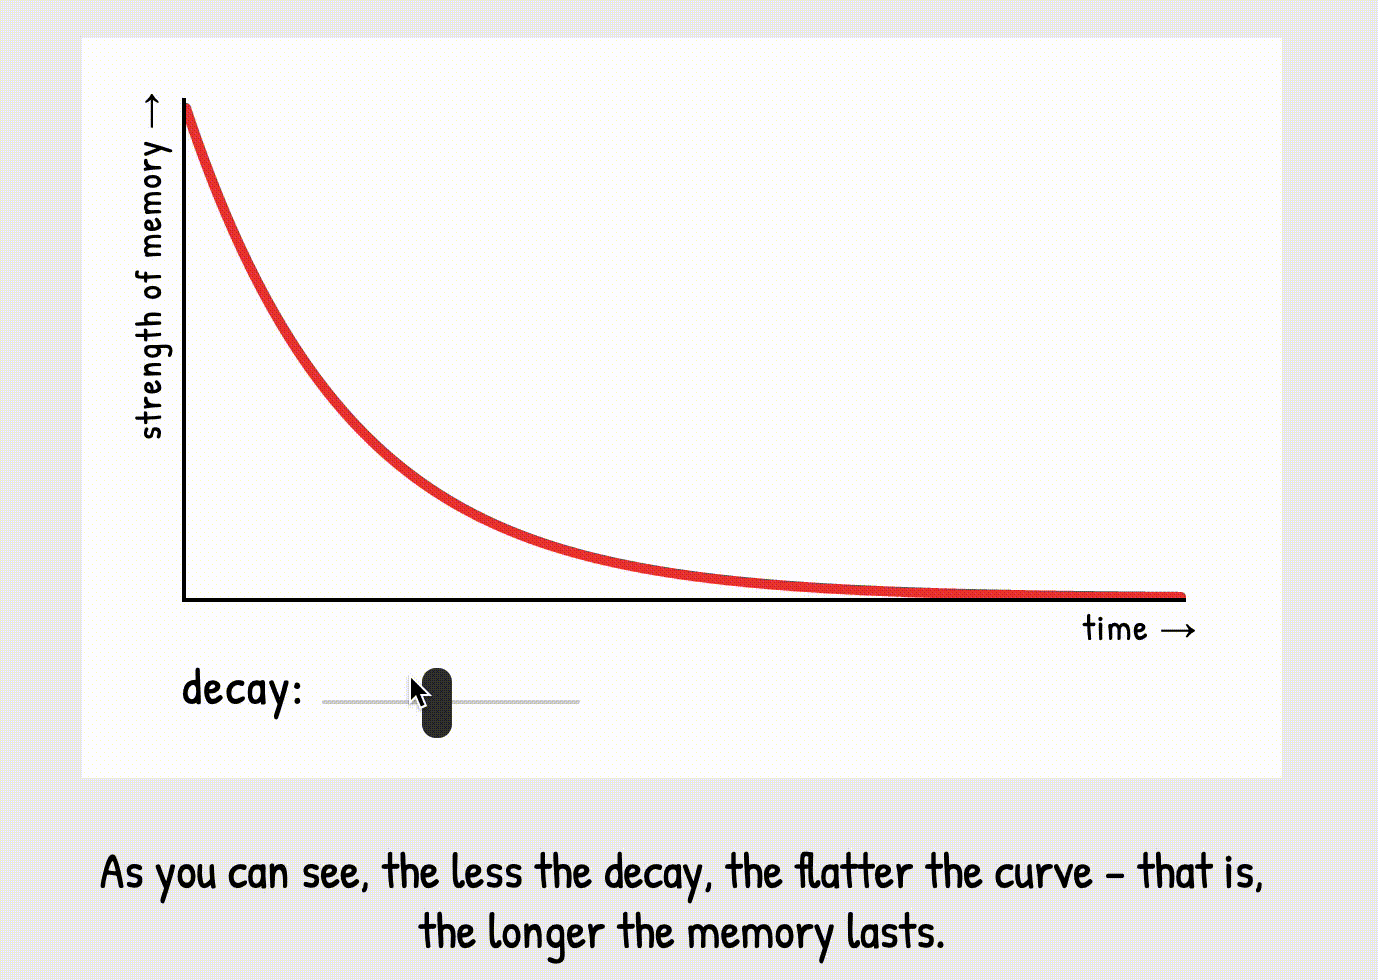 As you can see, the less the decay, the flatter the curve – that is, the longer the memory lasts.